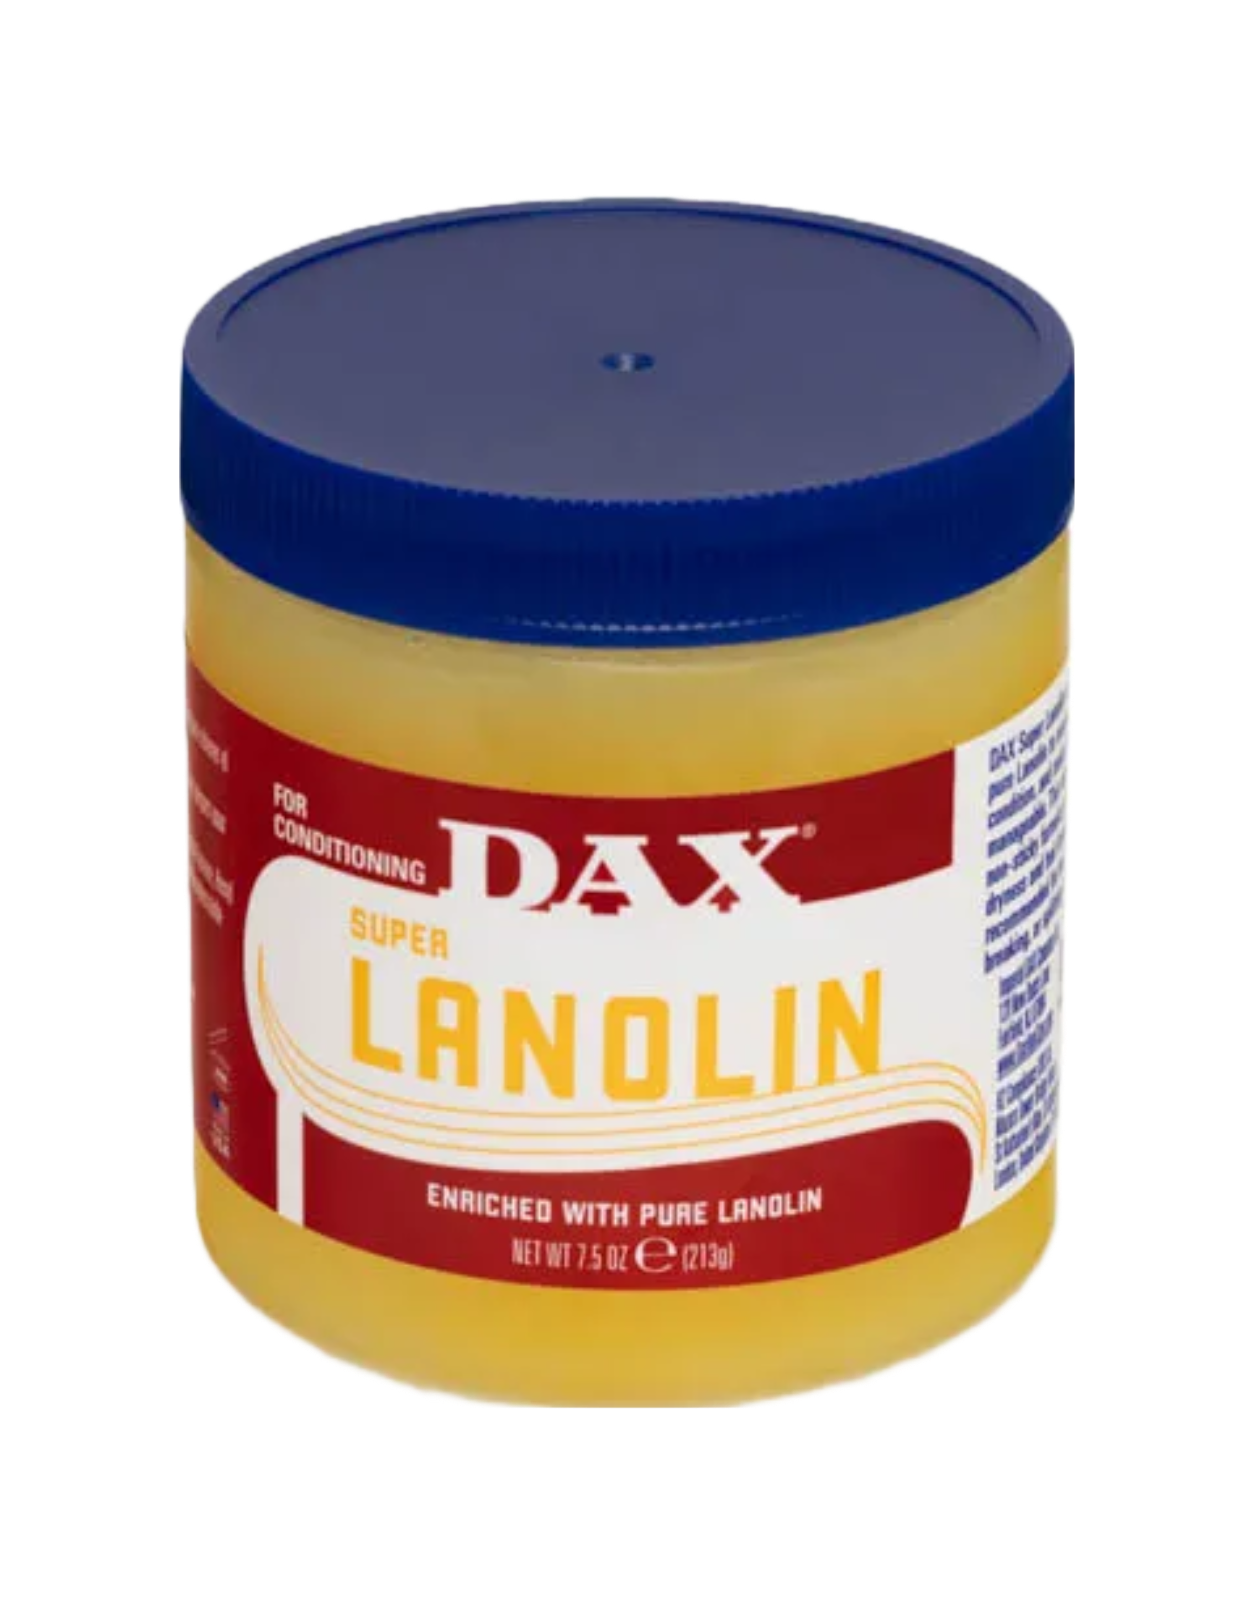 DAX - Super Lanolin For Conditioning